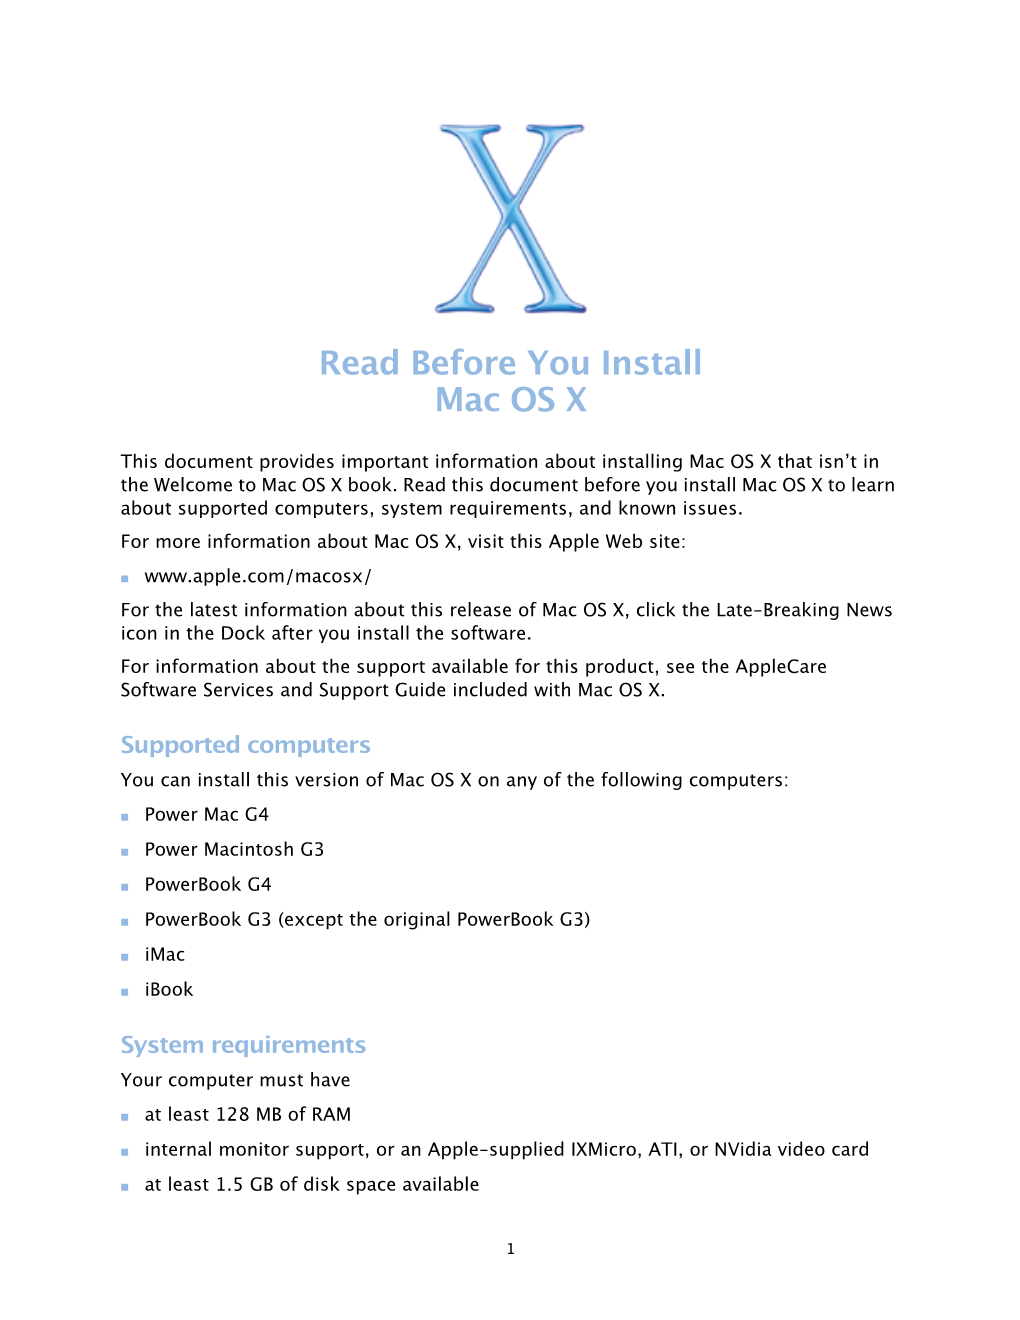 Read Before You Install Mac OS X